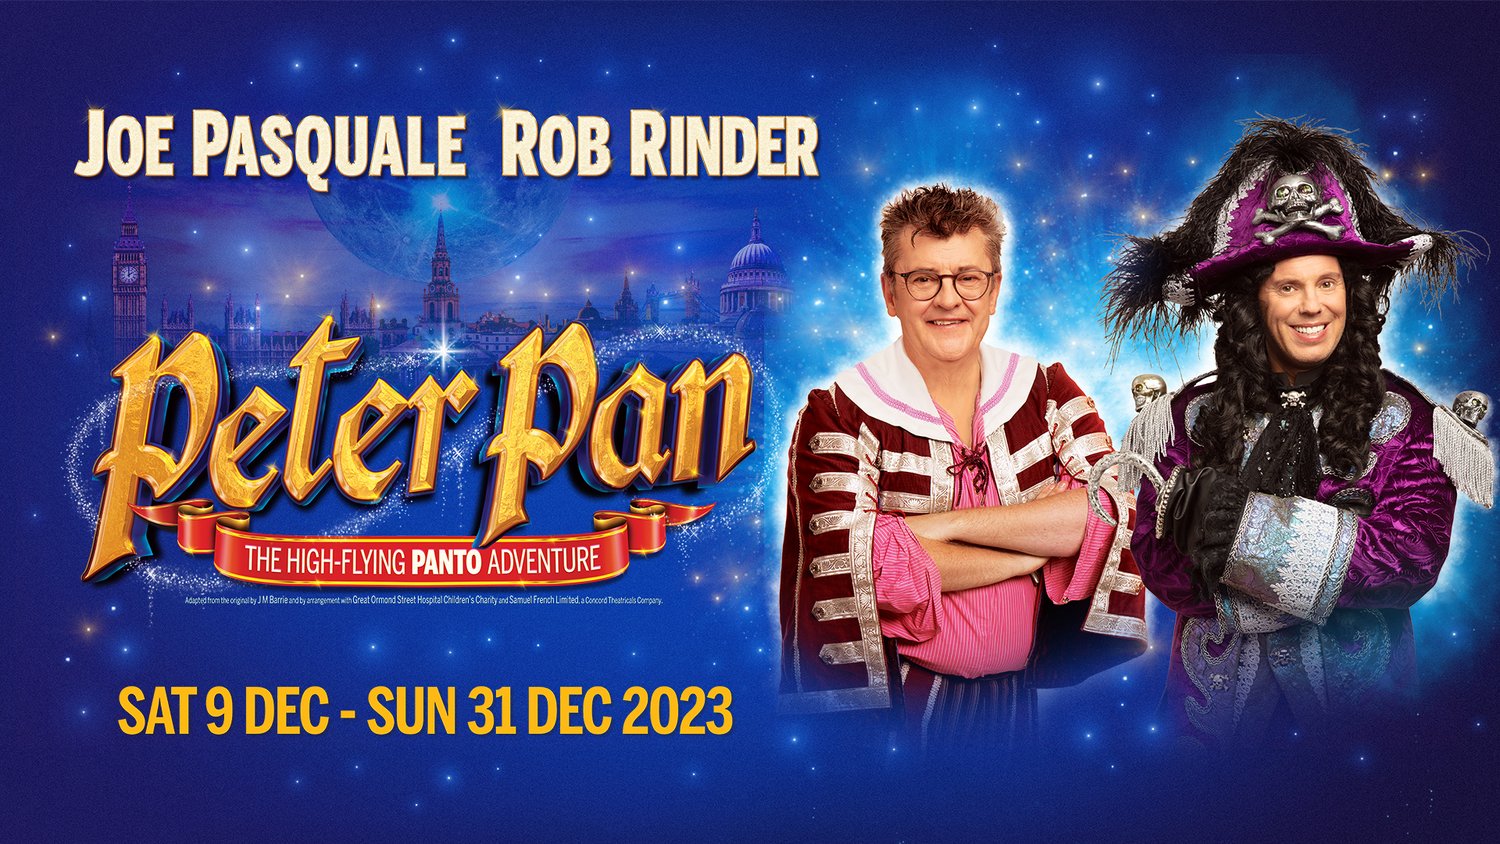 ROB RINDER TO JOIN JOE PASQUALE IN PETER PAN AT THE CLIFFS PAVILION ...